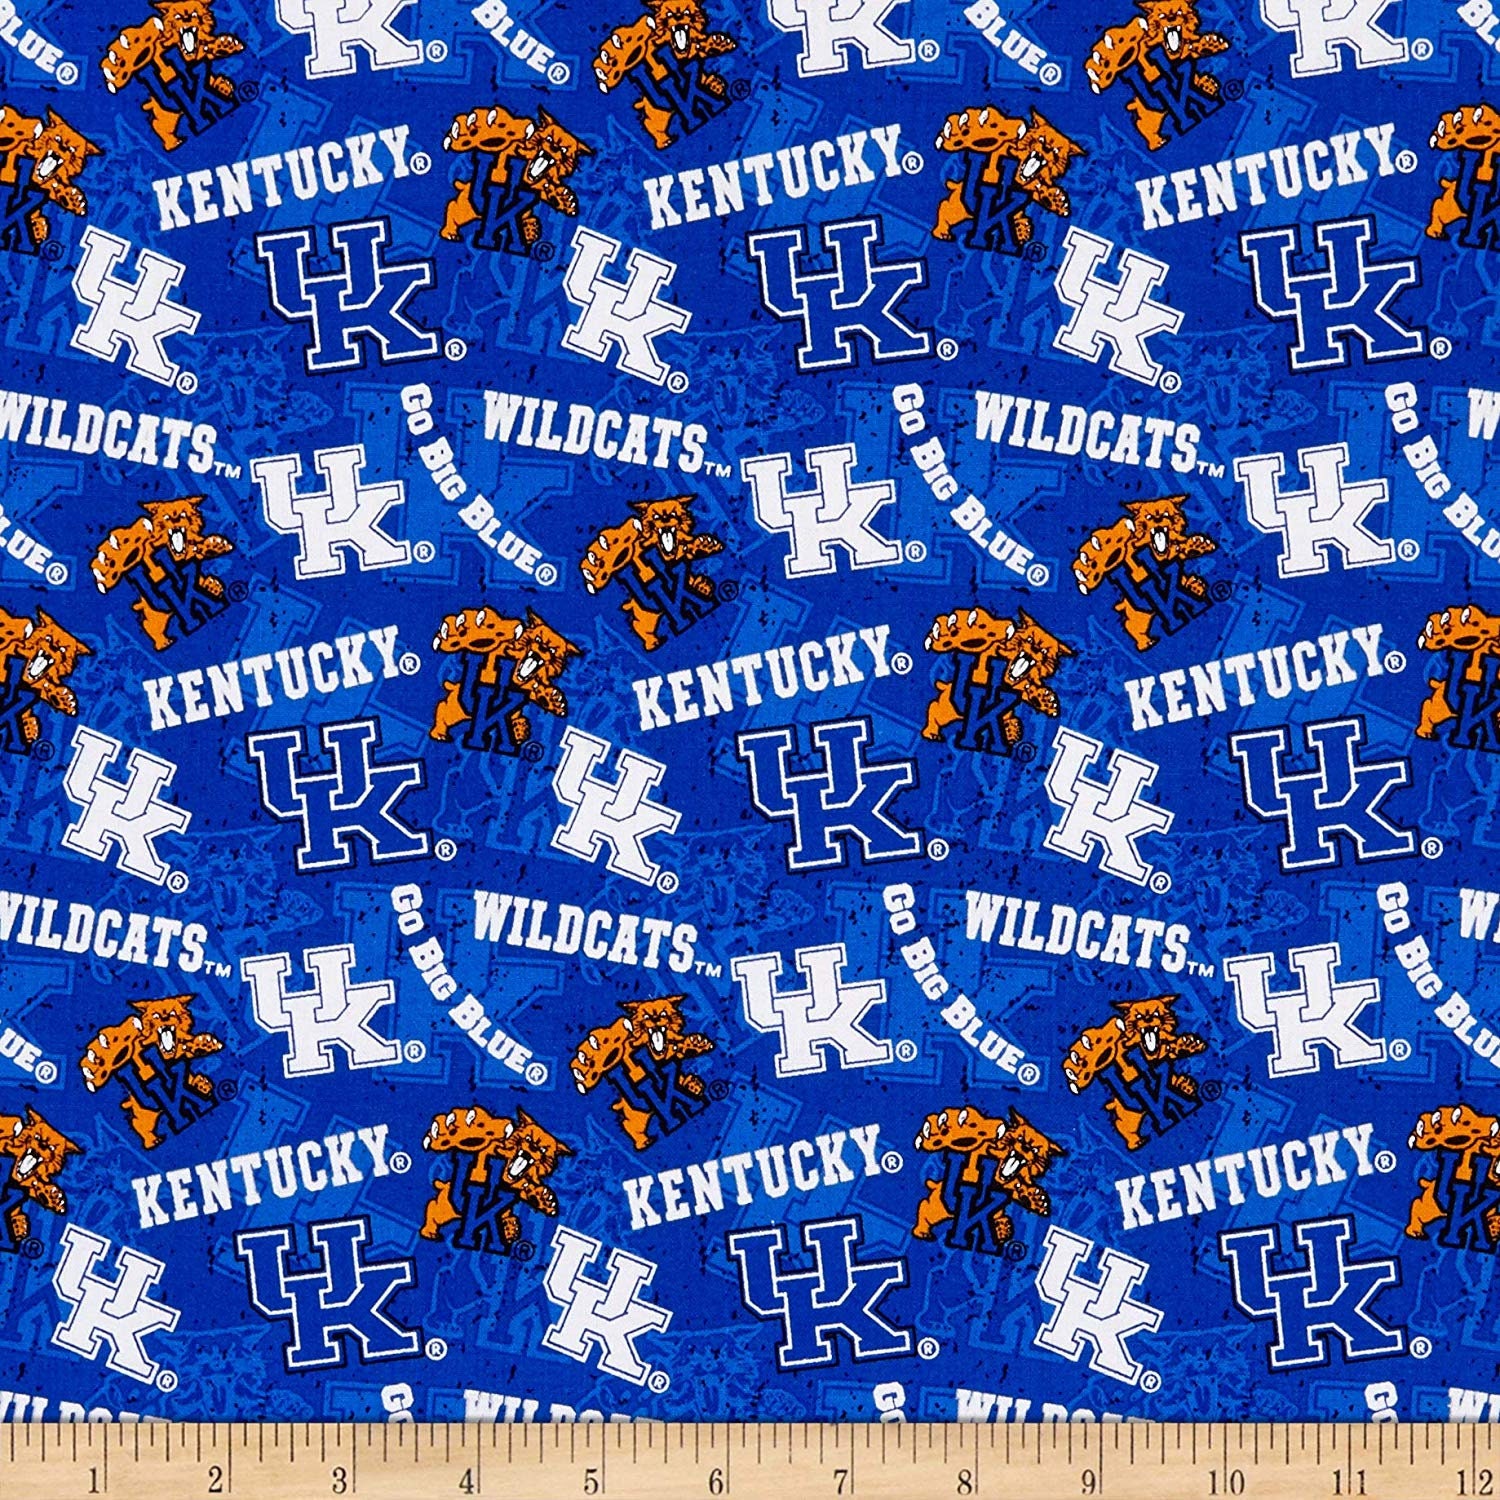 University of Louisville Cotton Fabric with New Tone ON Tone Design Newest  Pattern